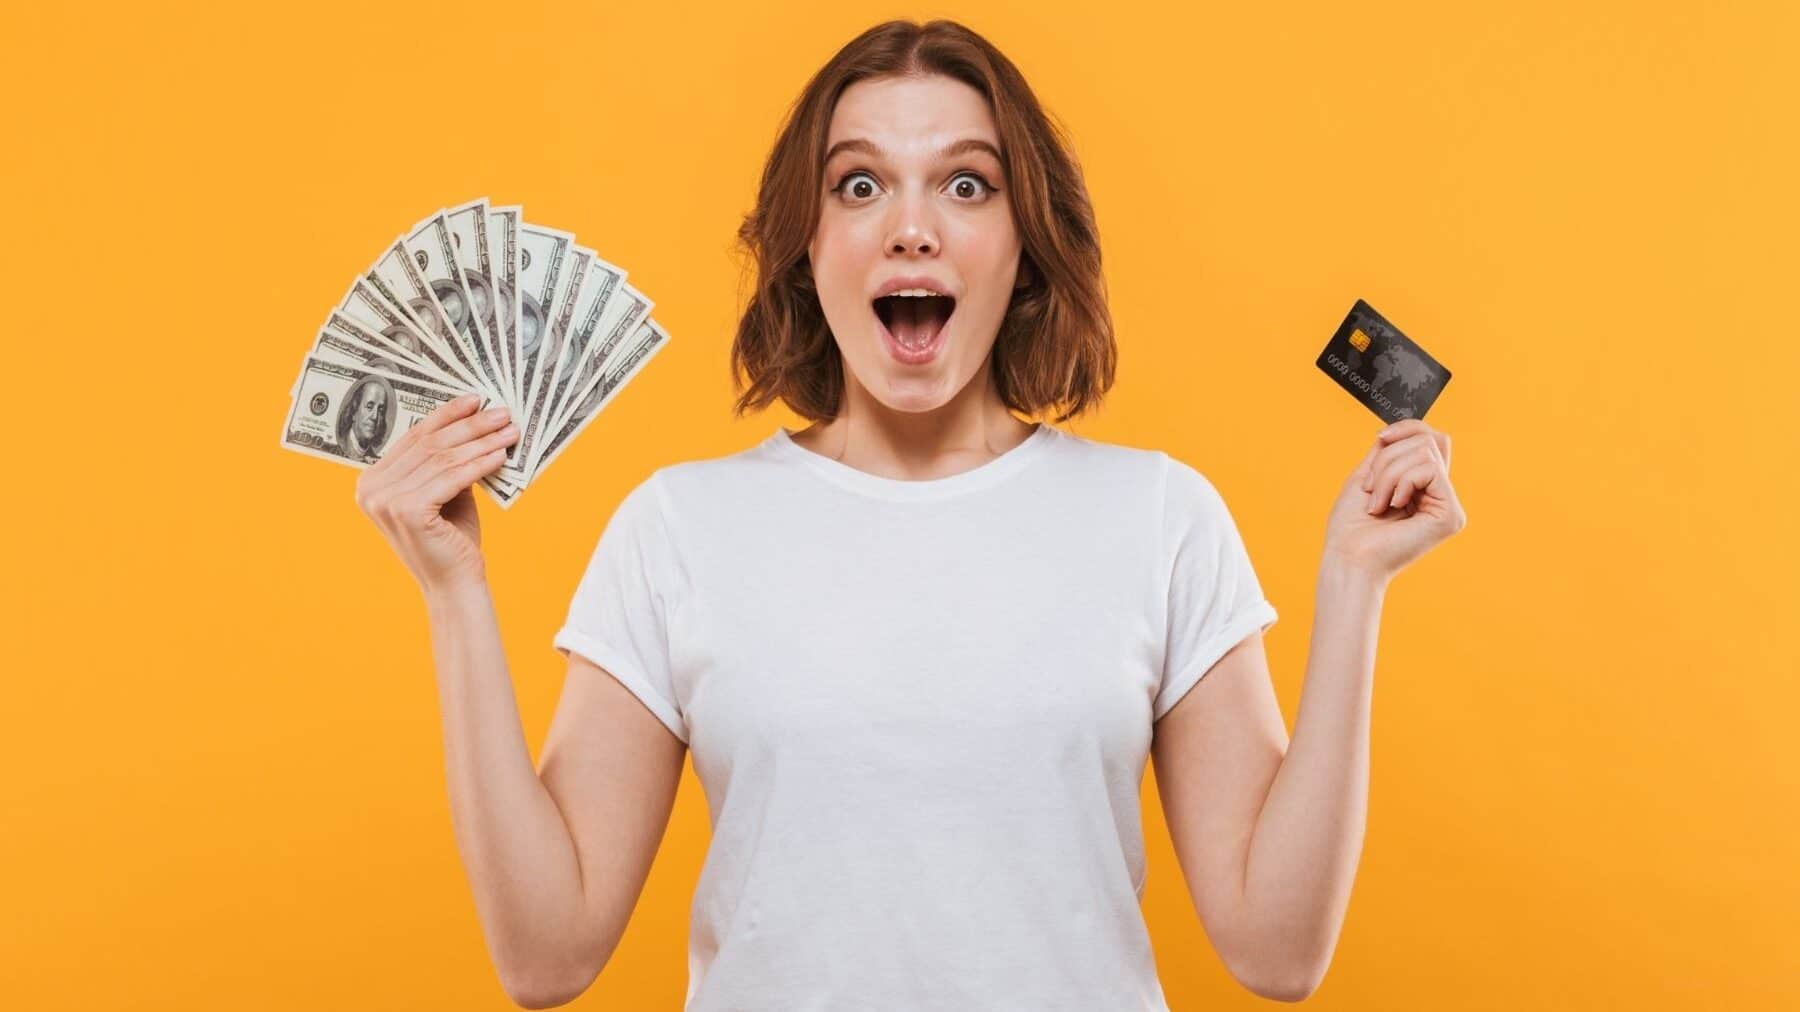 a smiling, young woman with short brown hair in a white Tshirt holding a fan of dollars in one hand and a credit card in the other